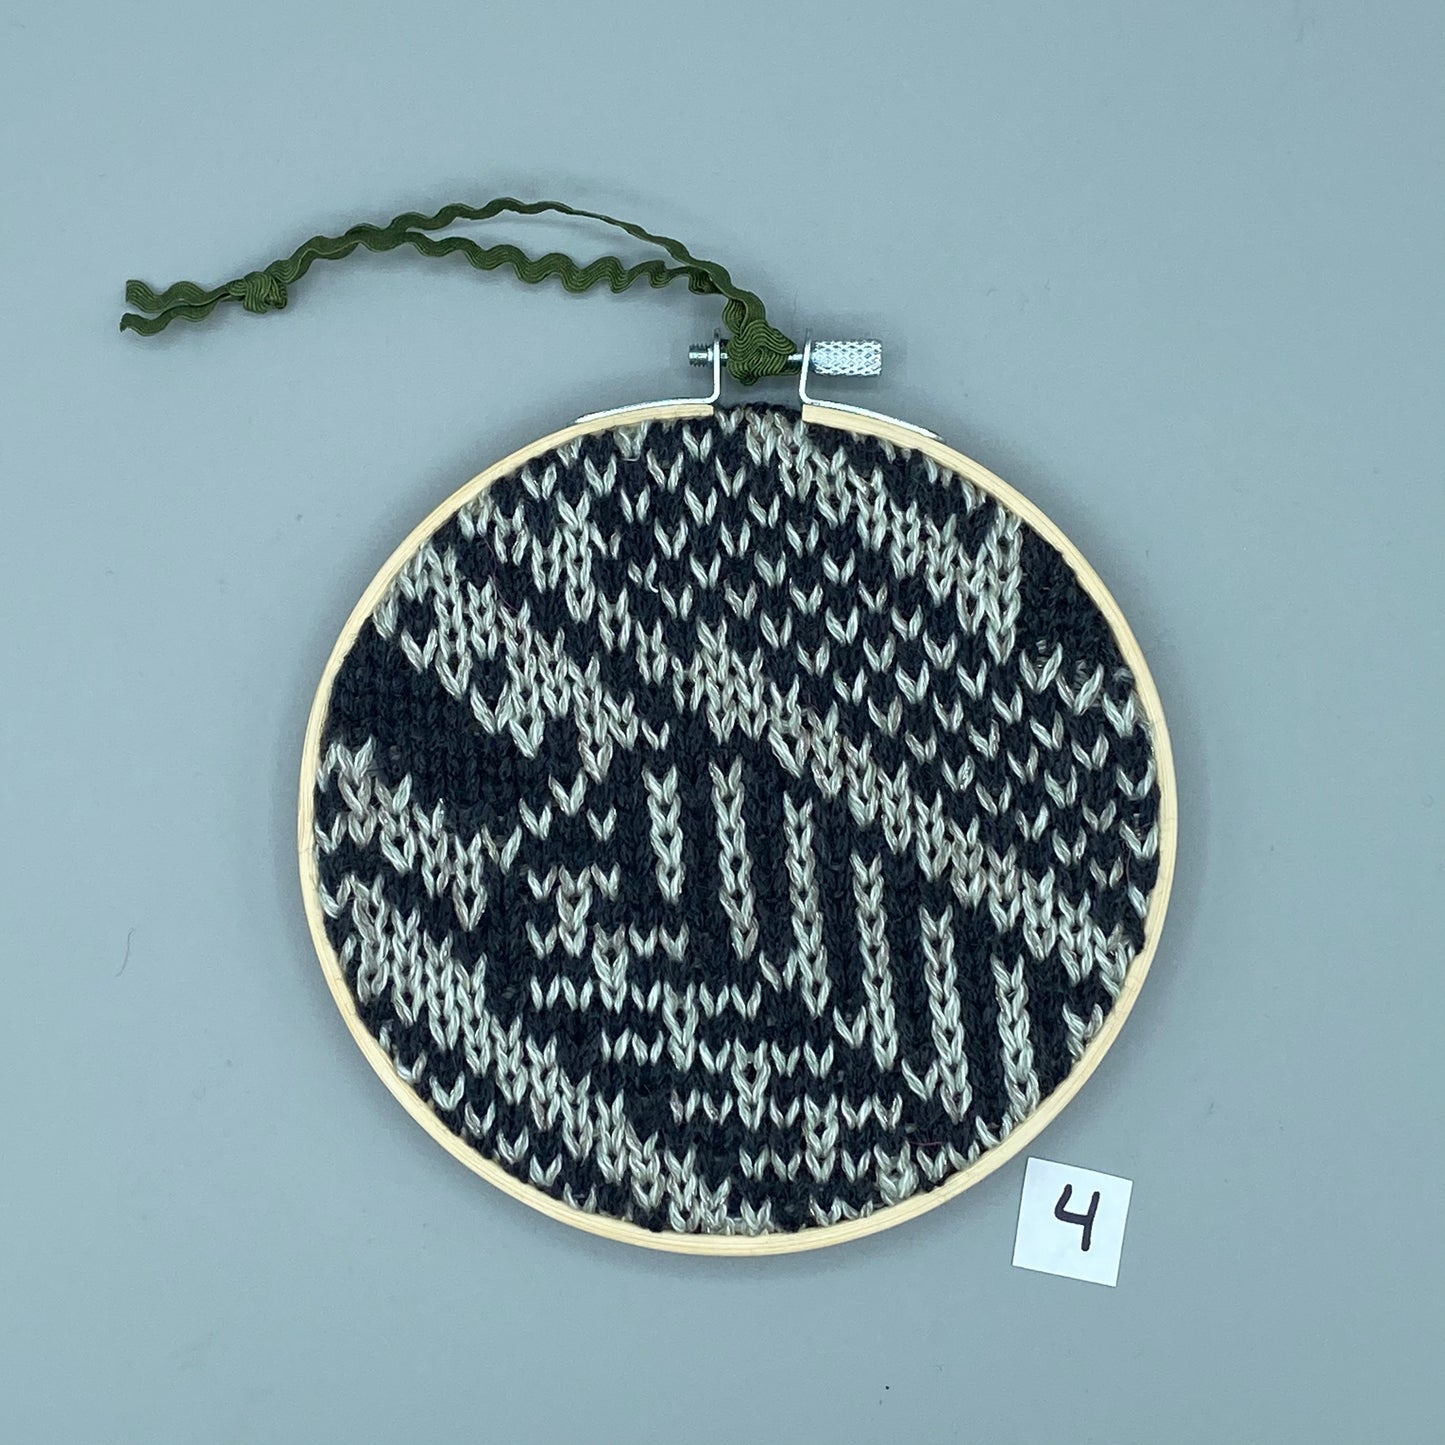 Knit Swatch Ornaments/Wall Hanging Large size